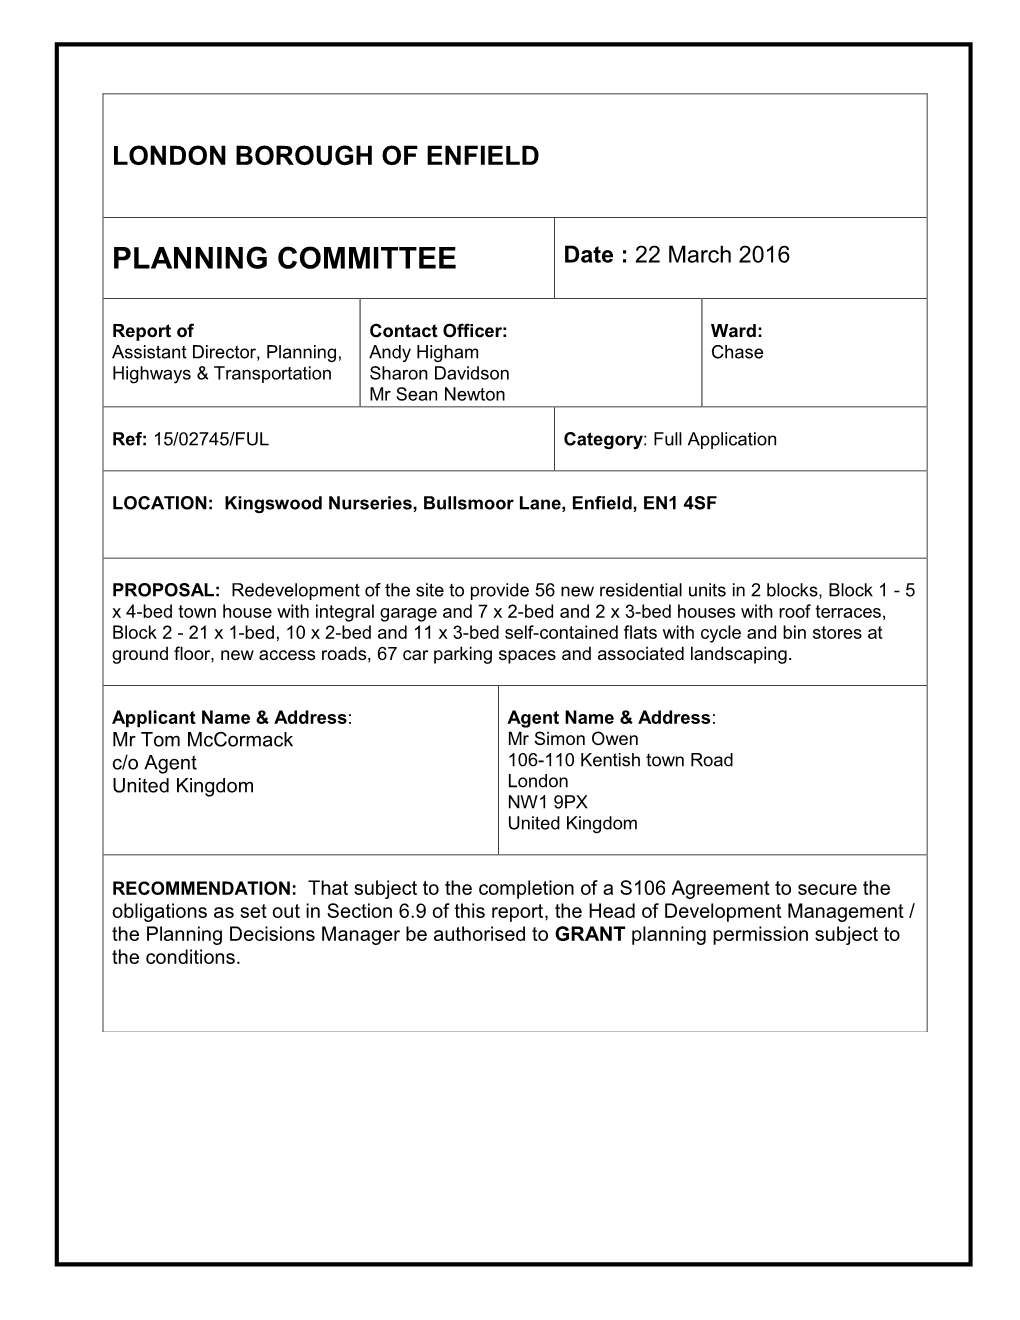 PLANNING COMMITTEE Date : 22 March 2016